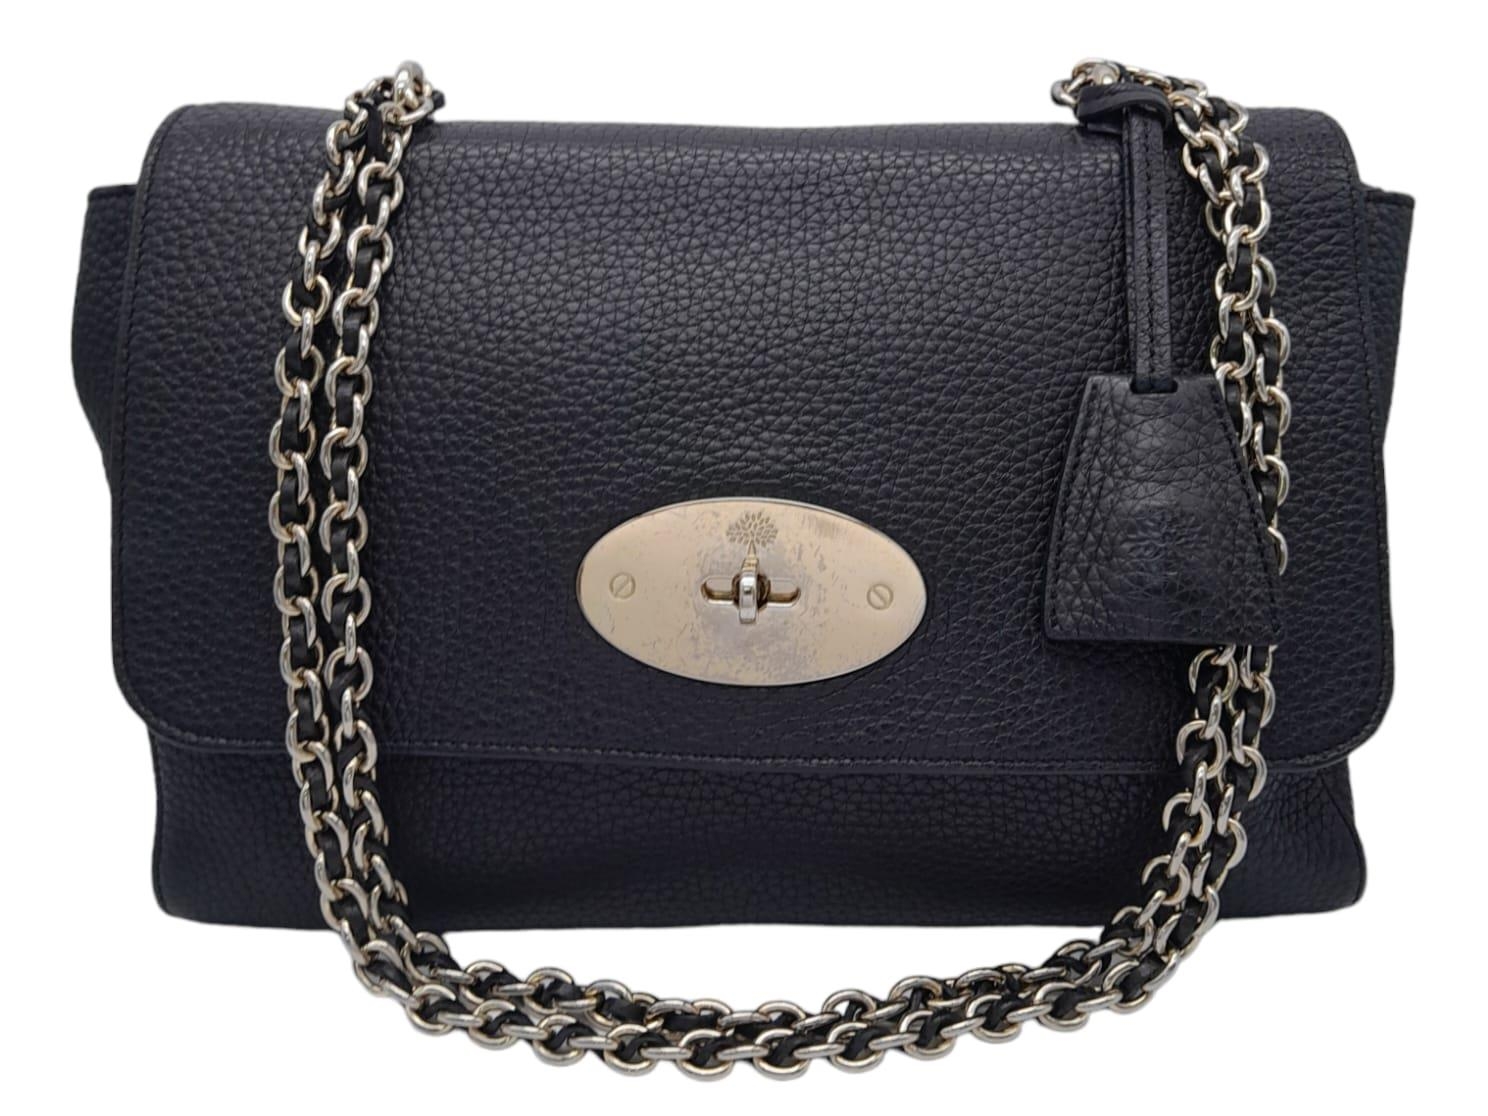 A Mulberry Black 'Lily' Bag. Leather exterior with gold-toned hardware, chain and leather strap,